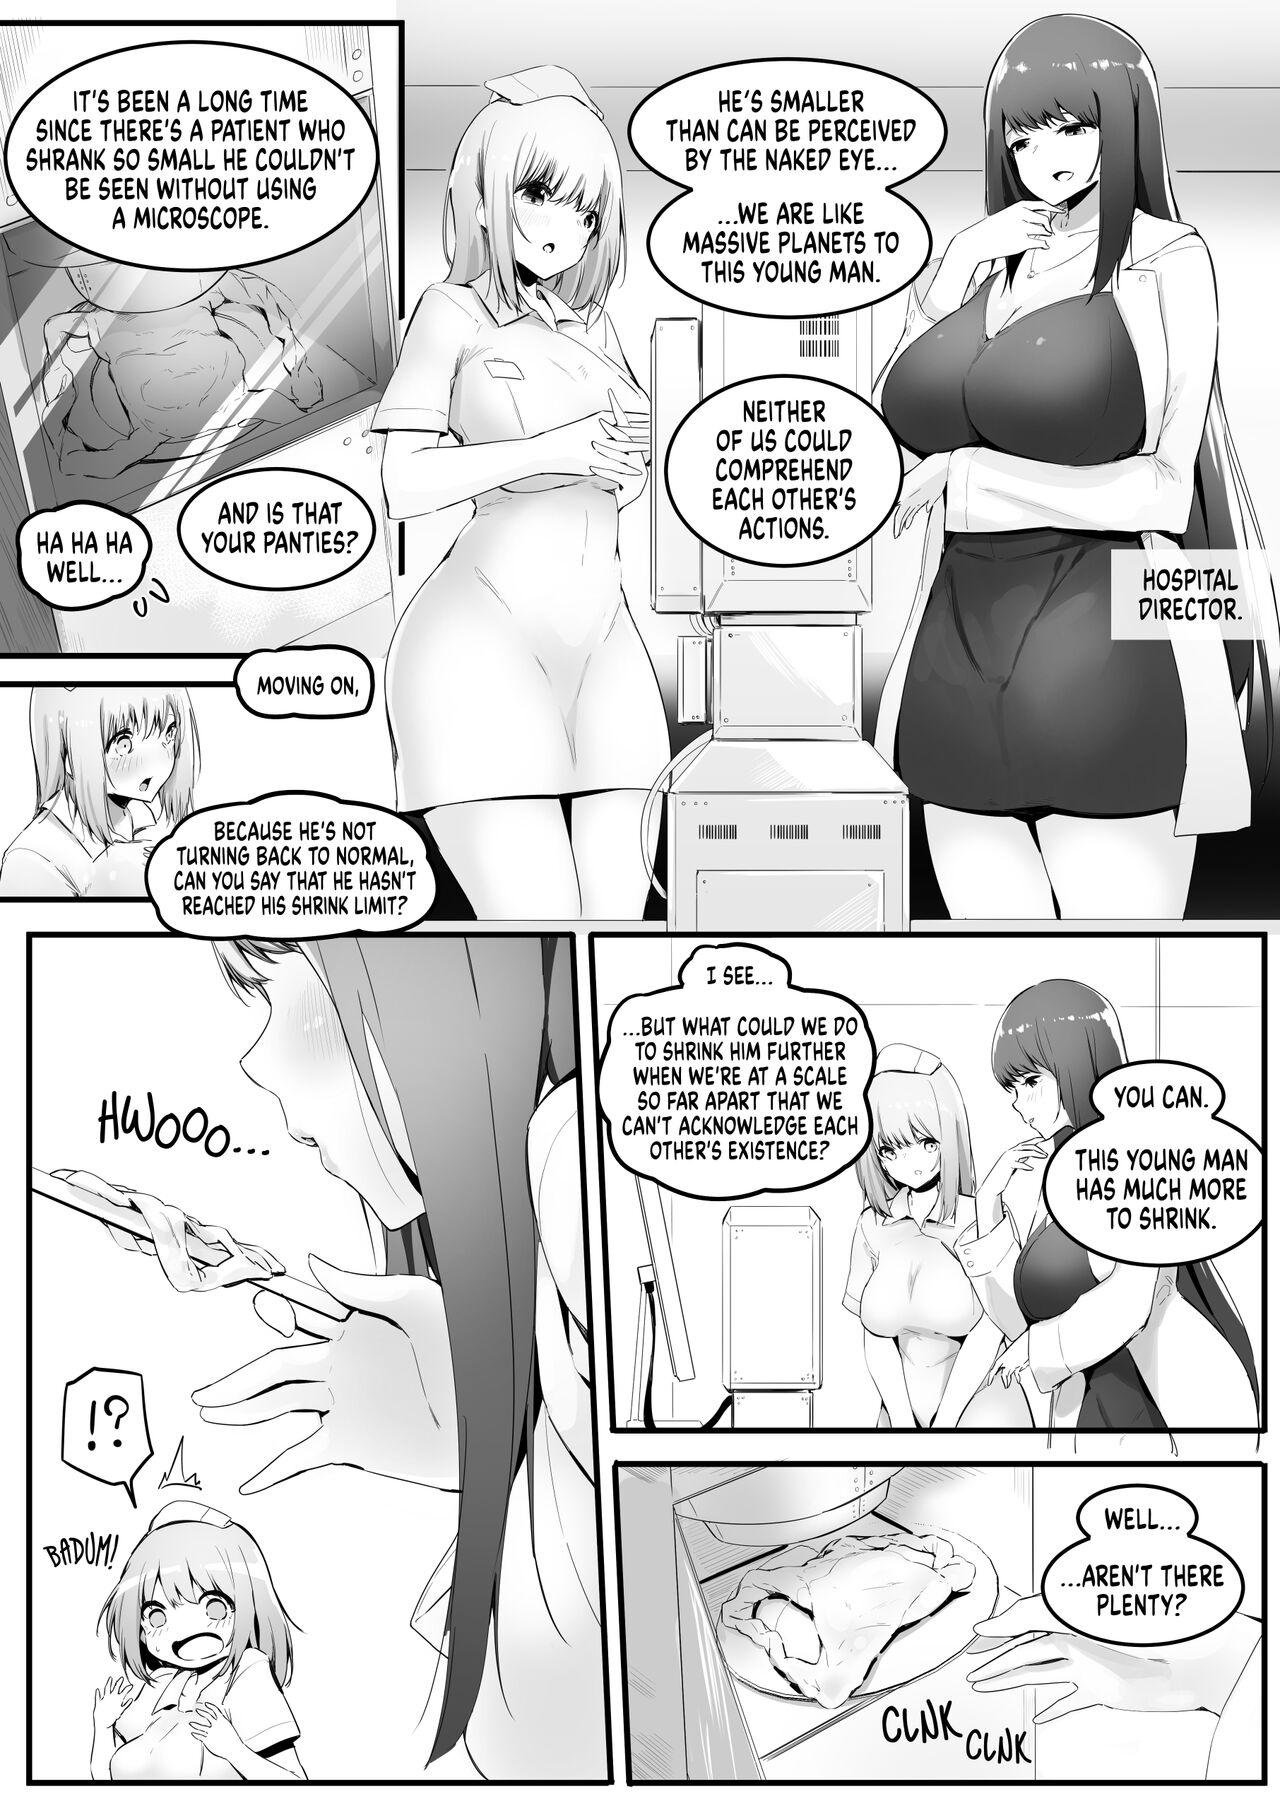 Short With Friends And Tininess 3 19yo - Page 2